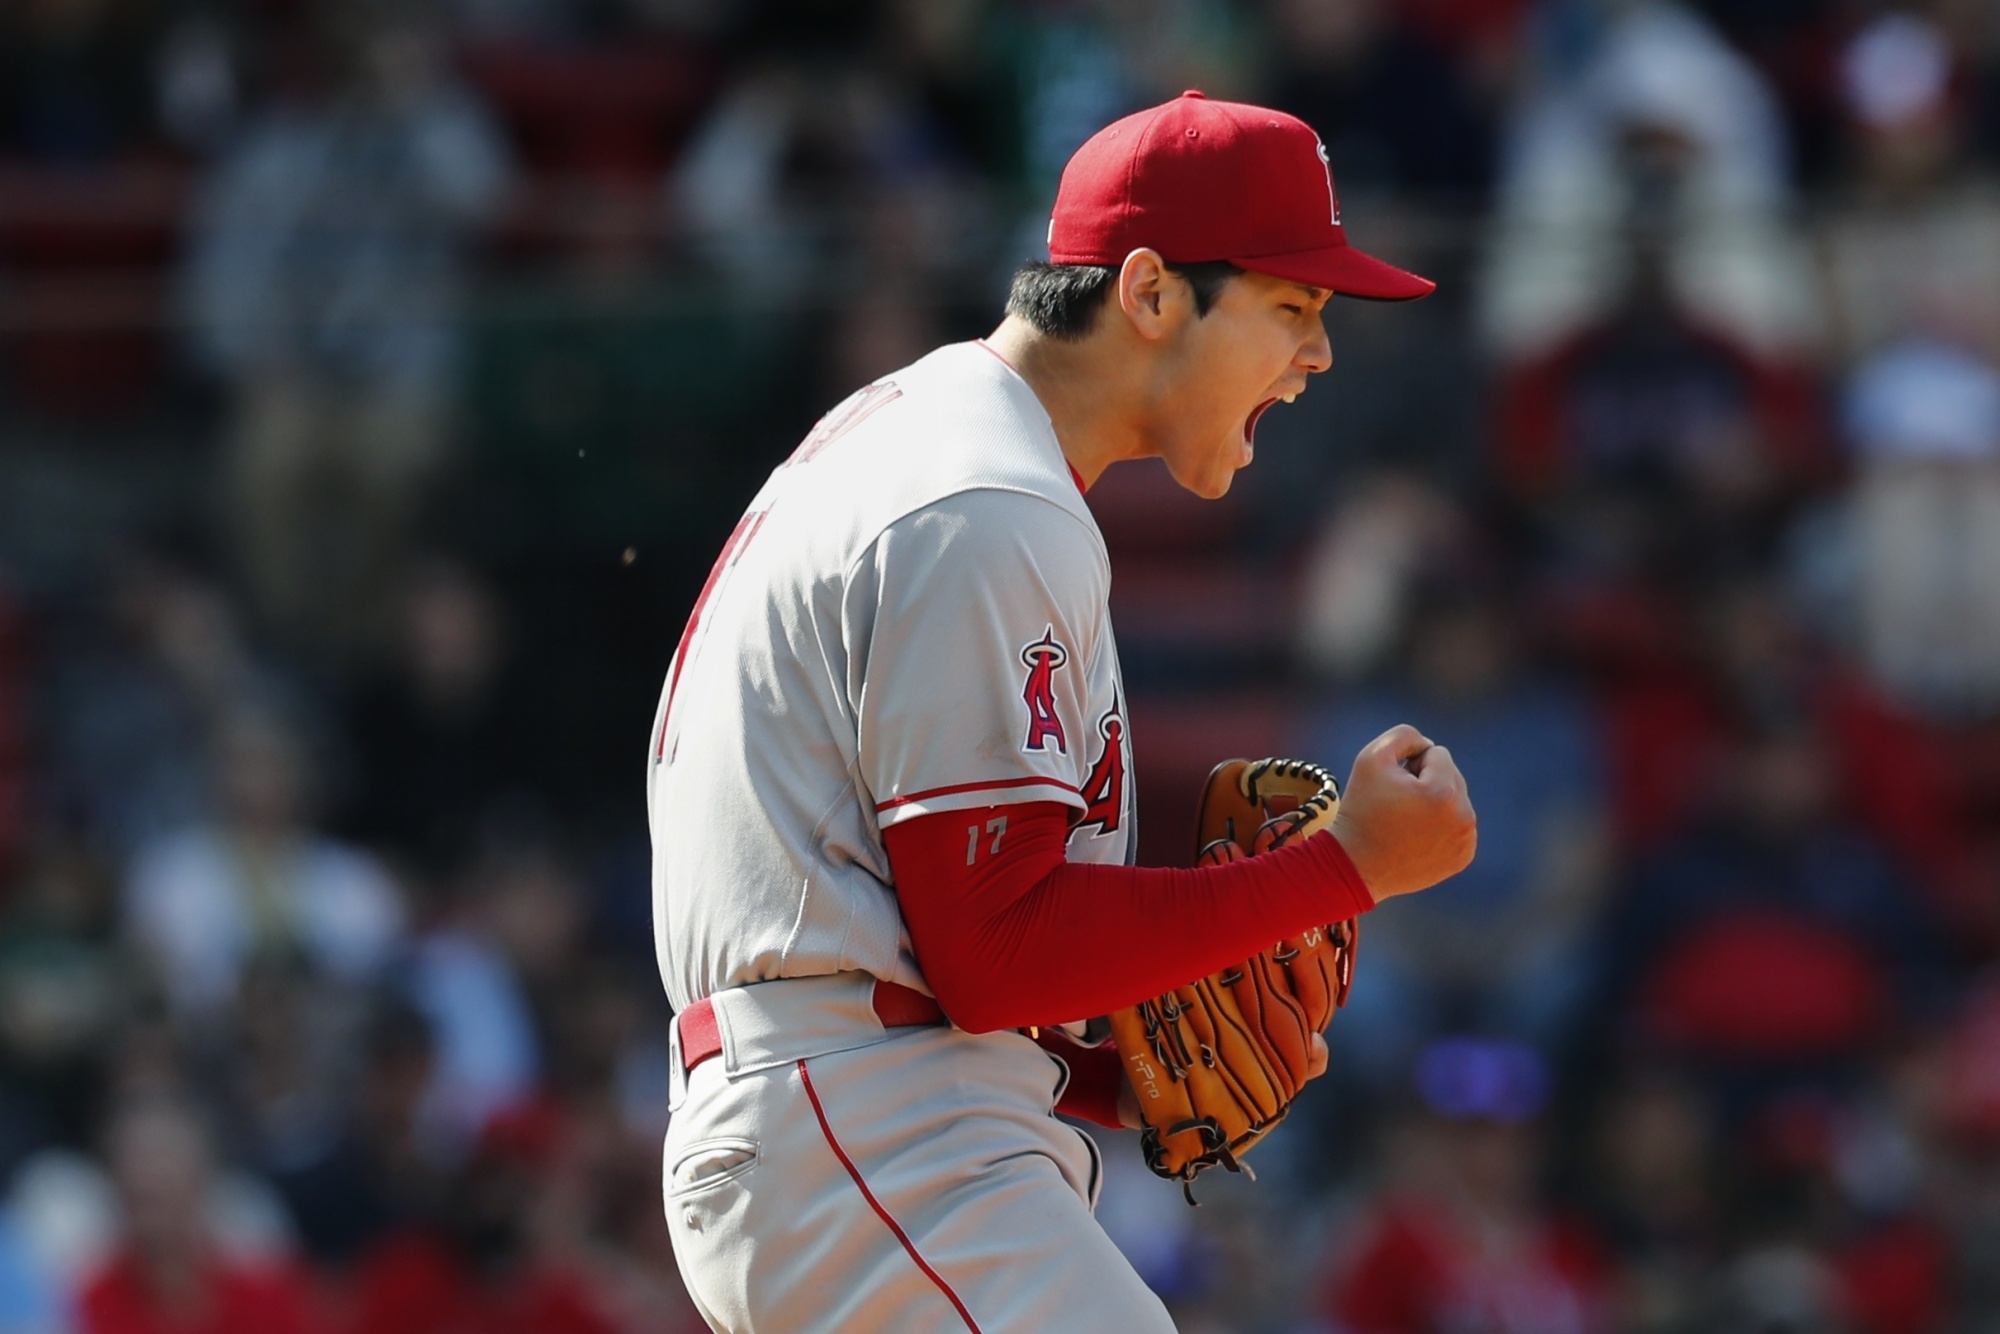 Angels' Shohei Ohtani earns win in historic All-Star debut